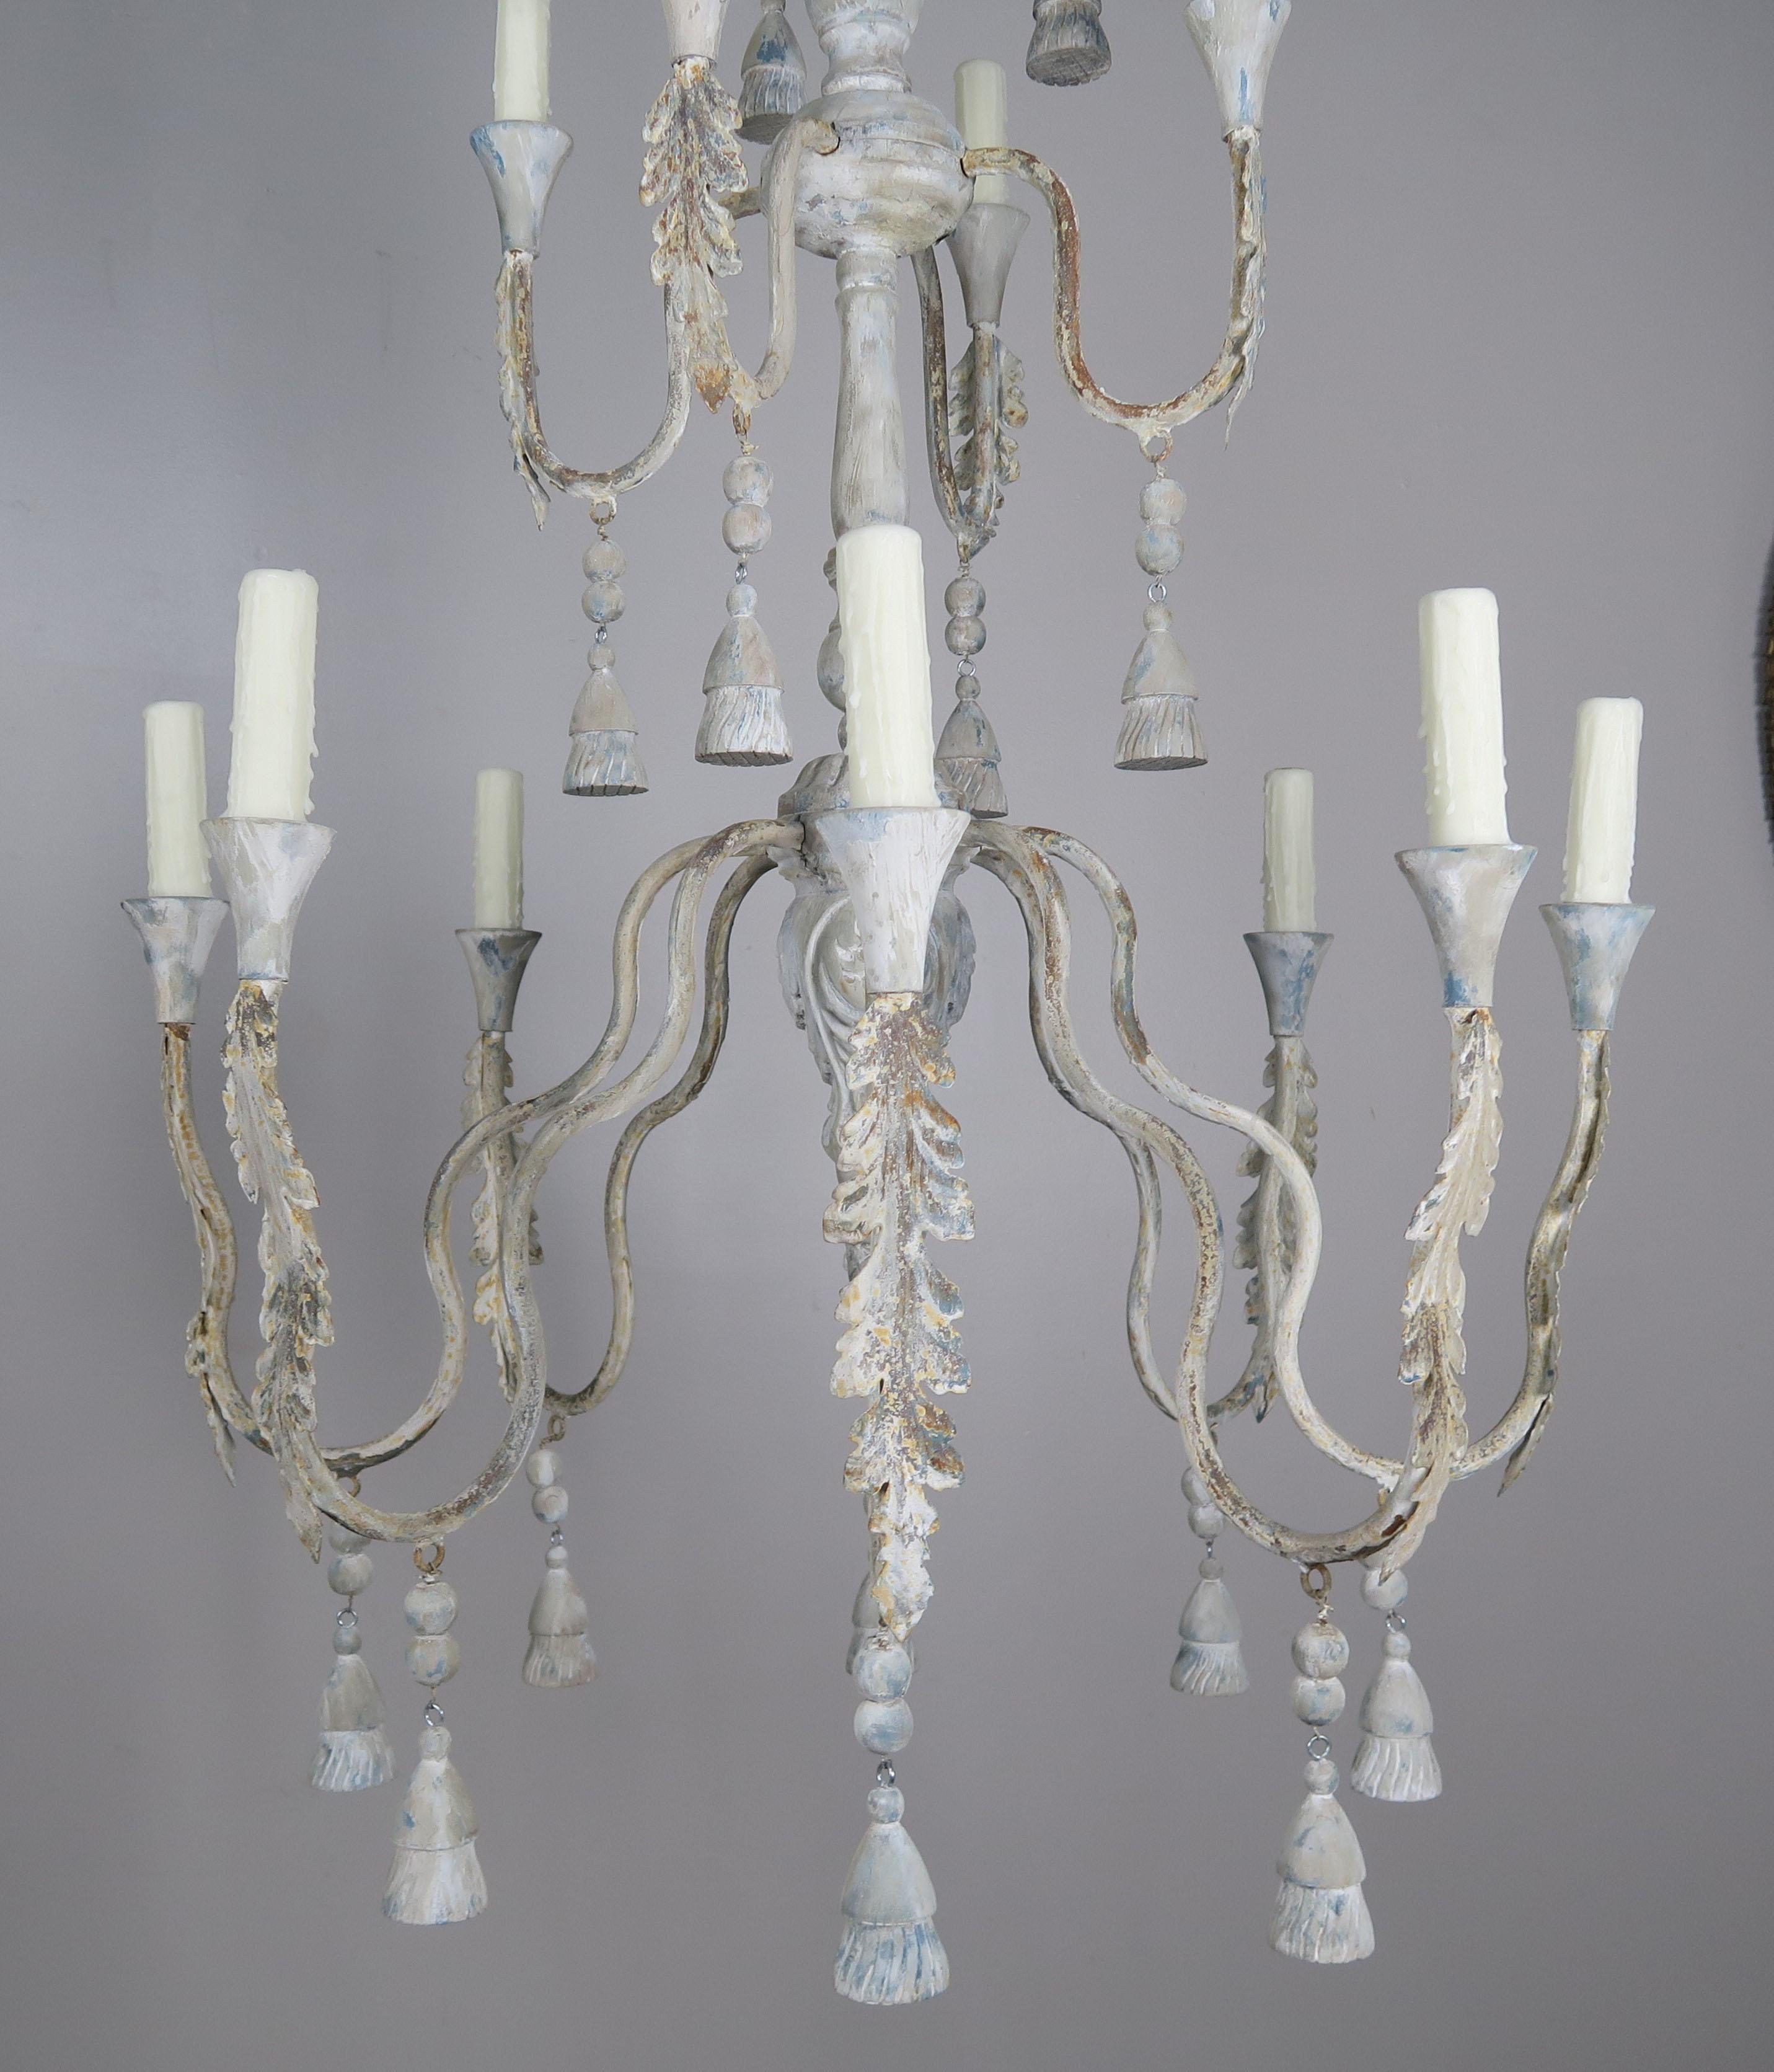 2-Tier Painted Cream Colored Chandeliers with Tassels by Melissa Levinson 3